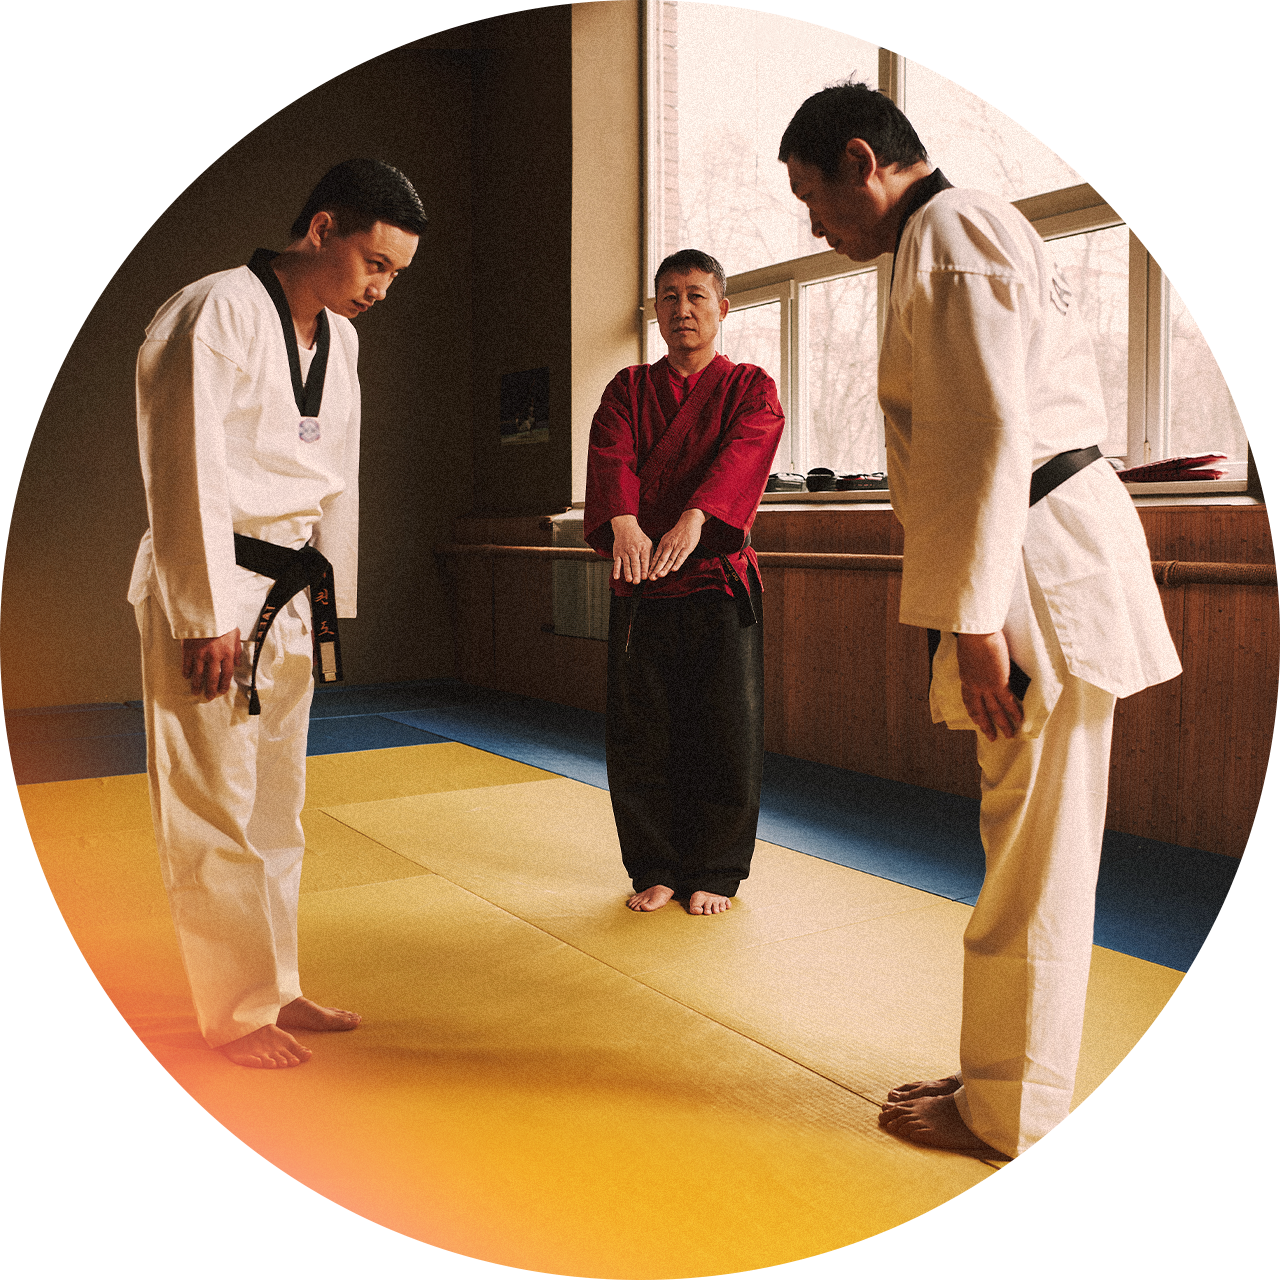 From South Korea to Japan, students will make a unique connection with the culture of these countries, including a Tae Kwon Do lesson, as pictured here.